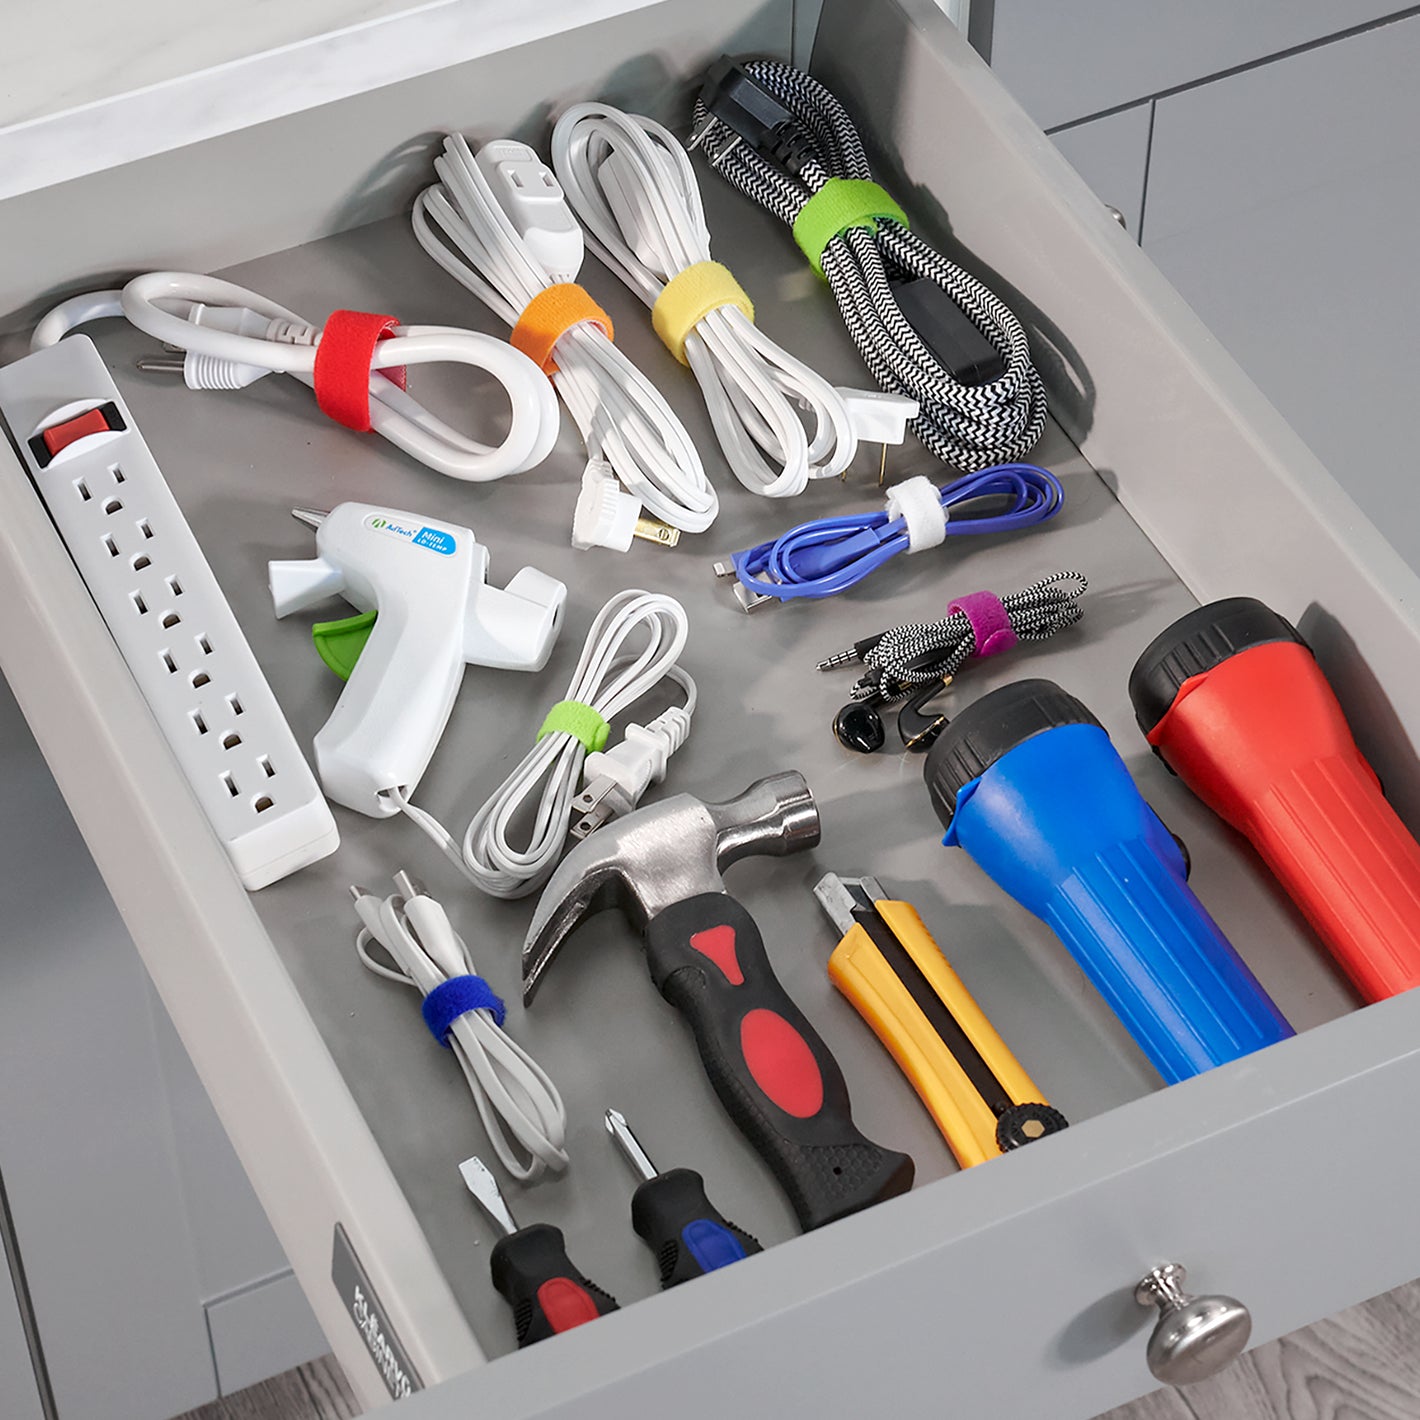 cords and wrap-it products laying inside of grey drawer